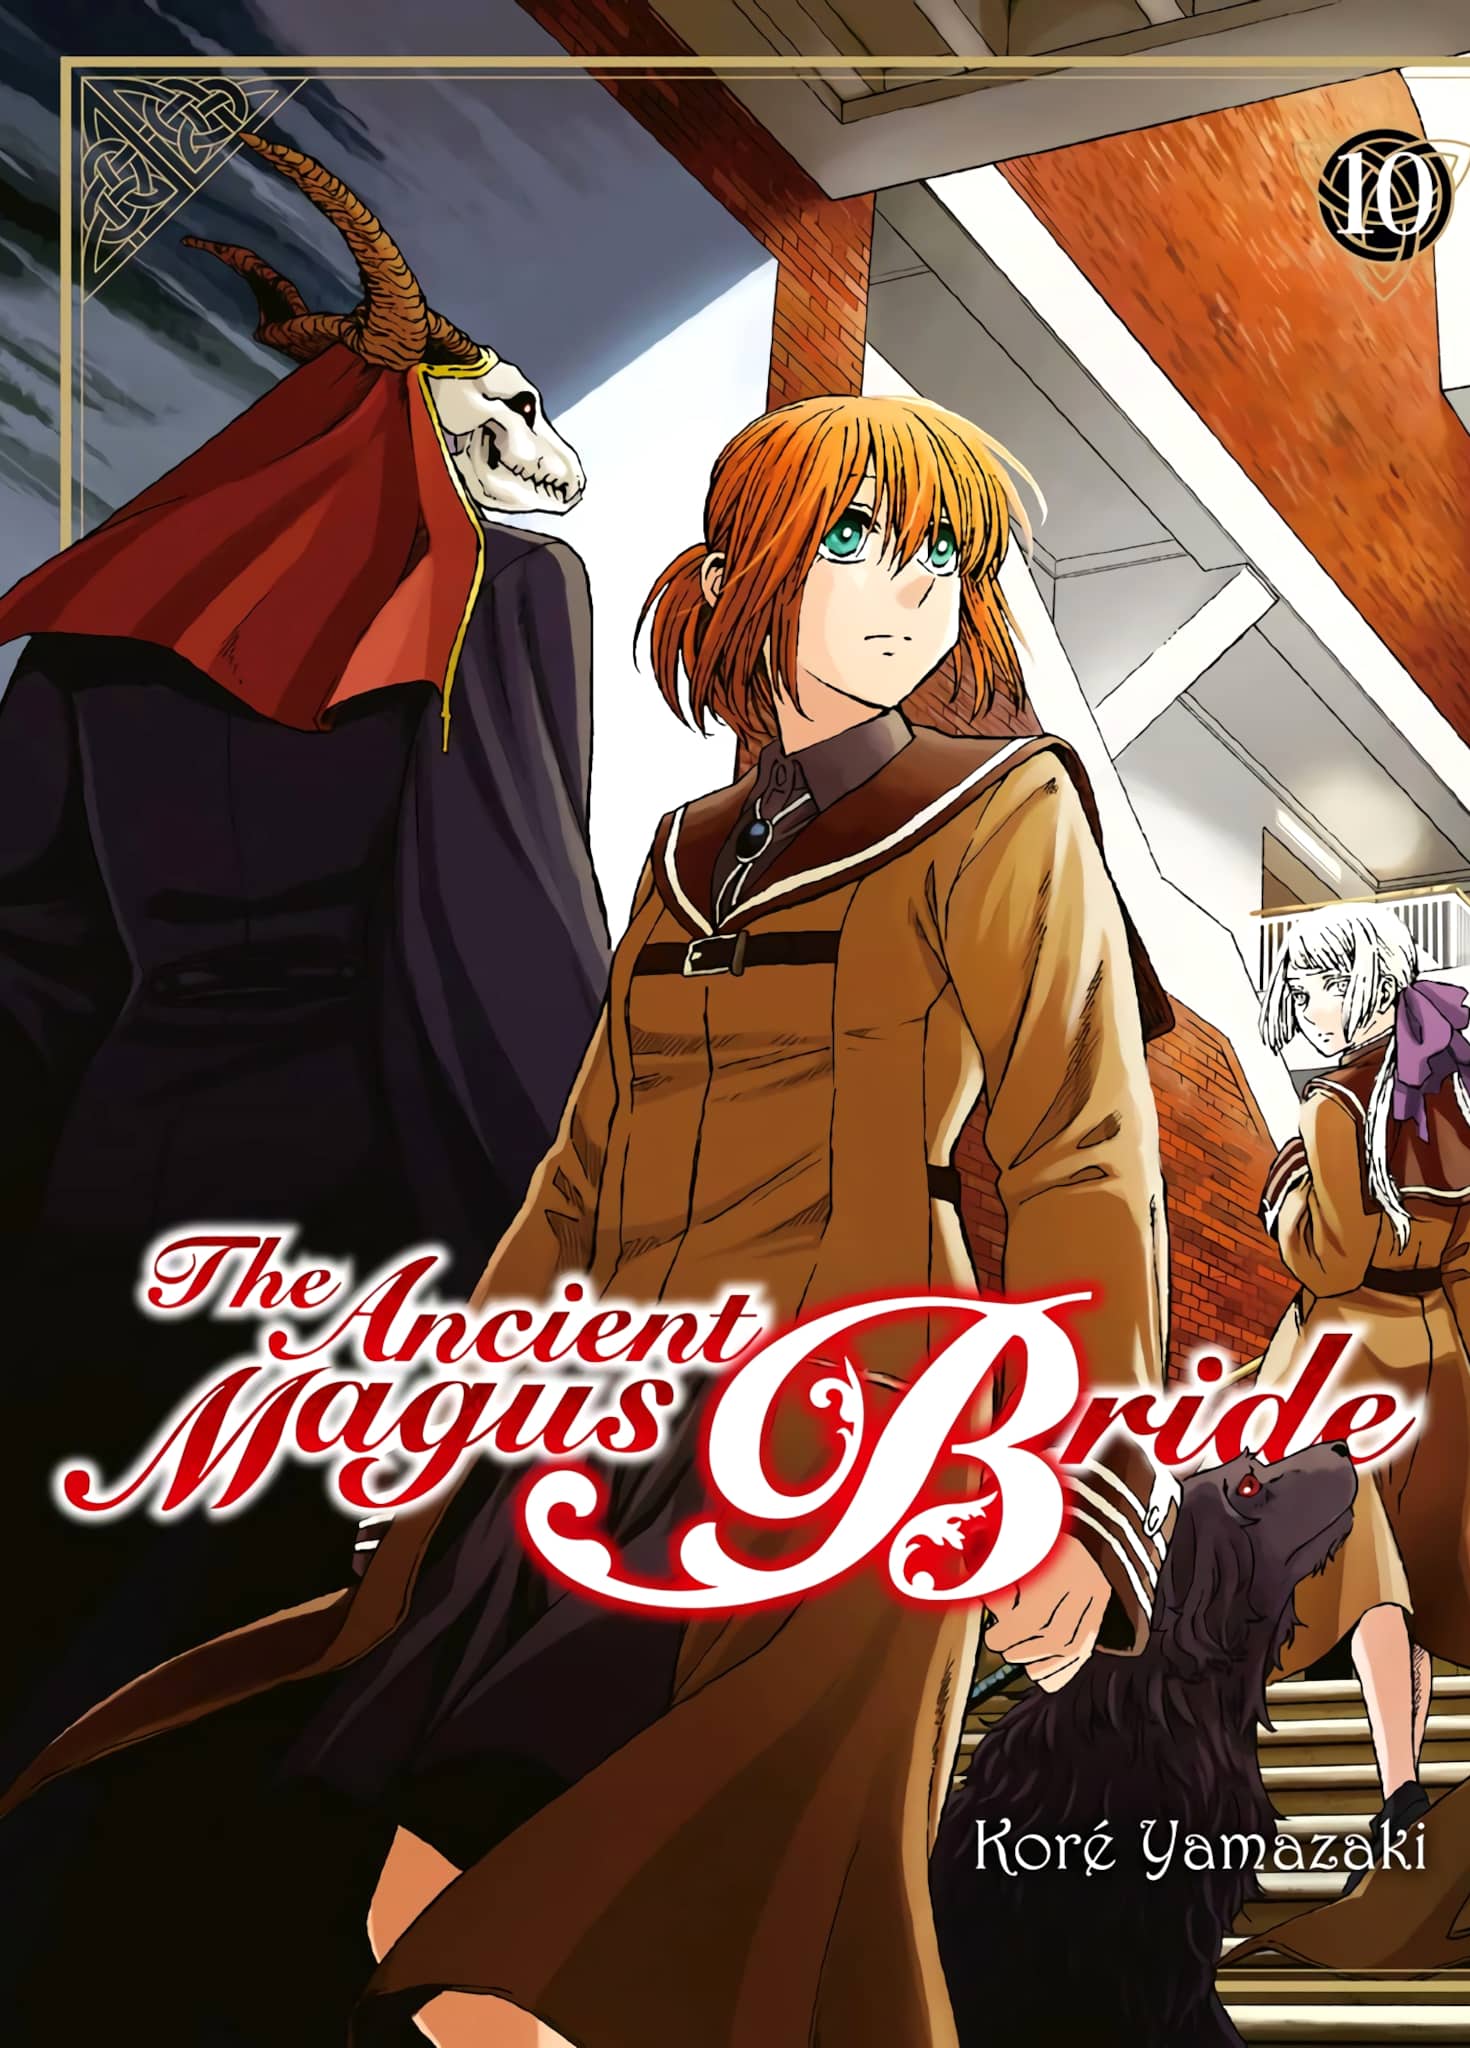 Tome 10 du manga The Ancient Magus Bride